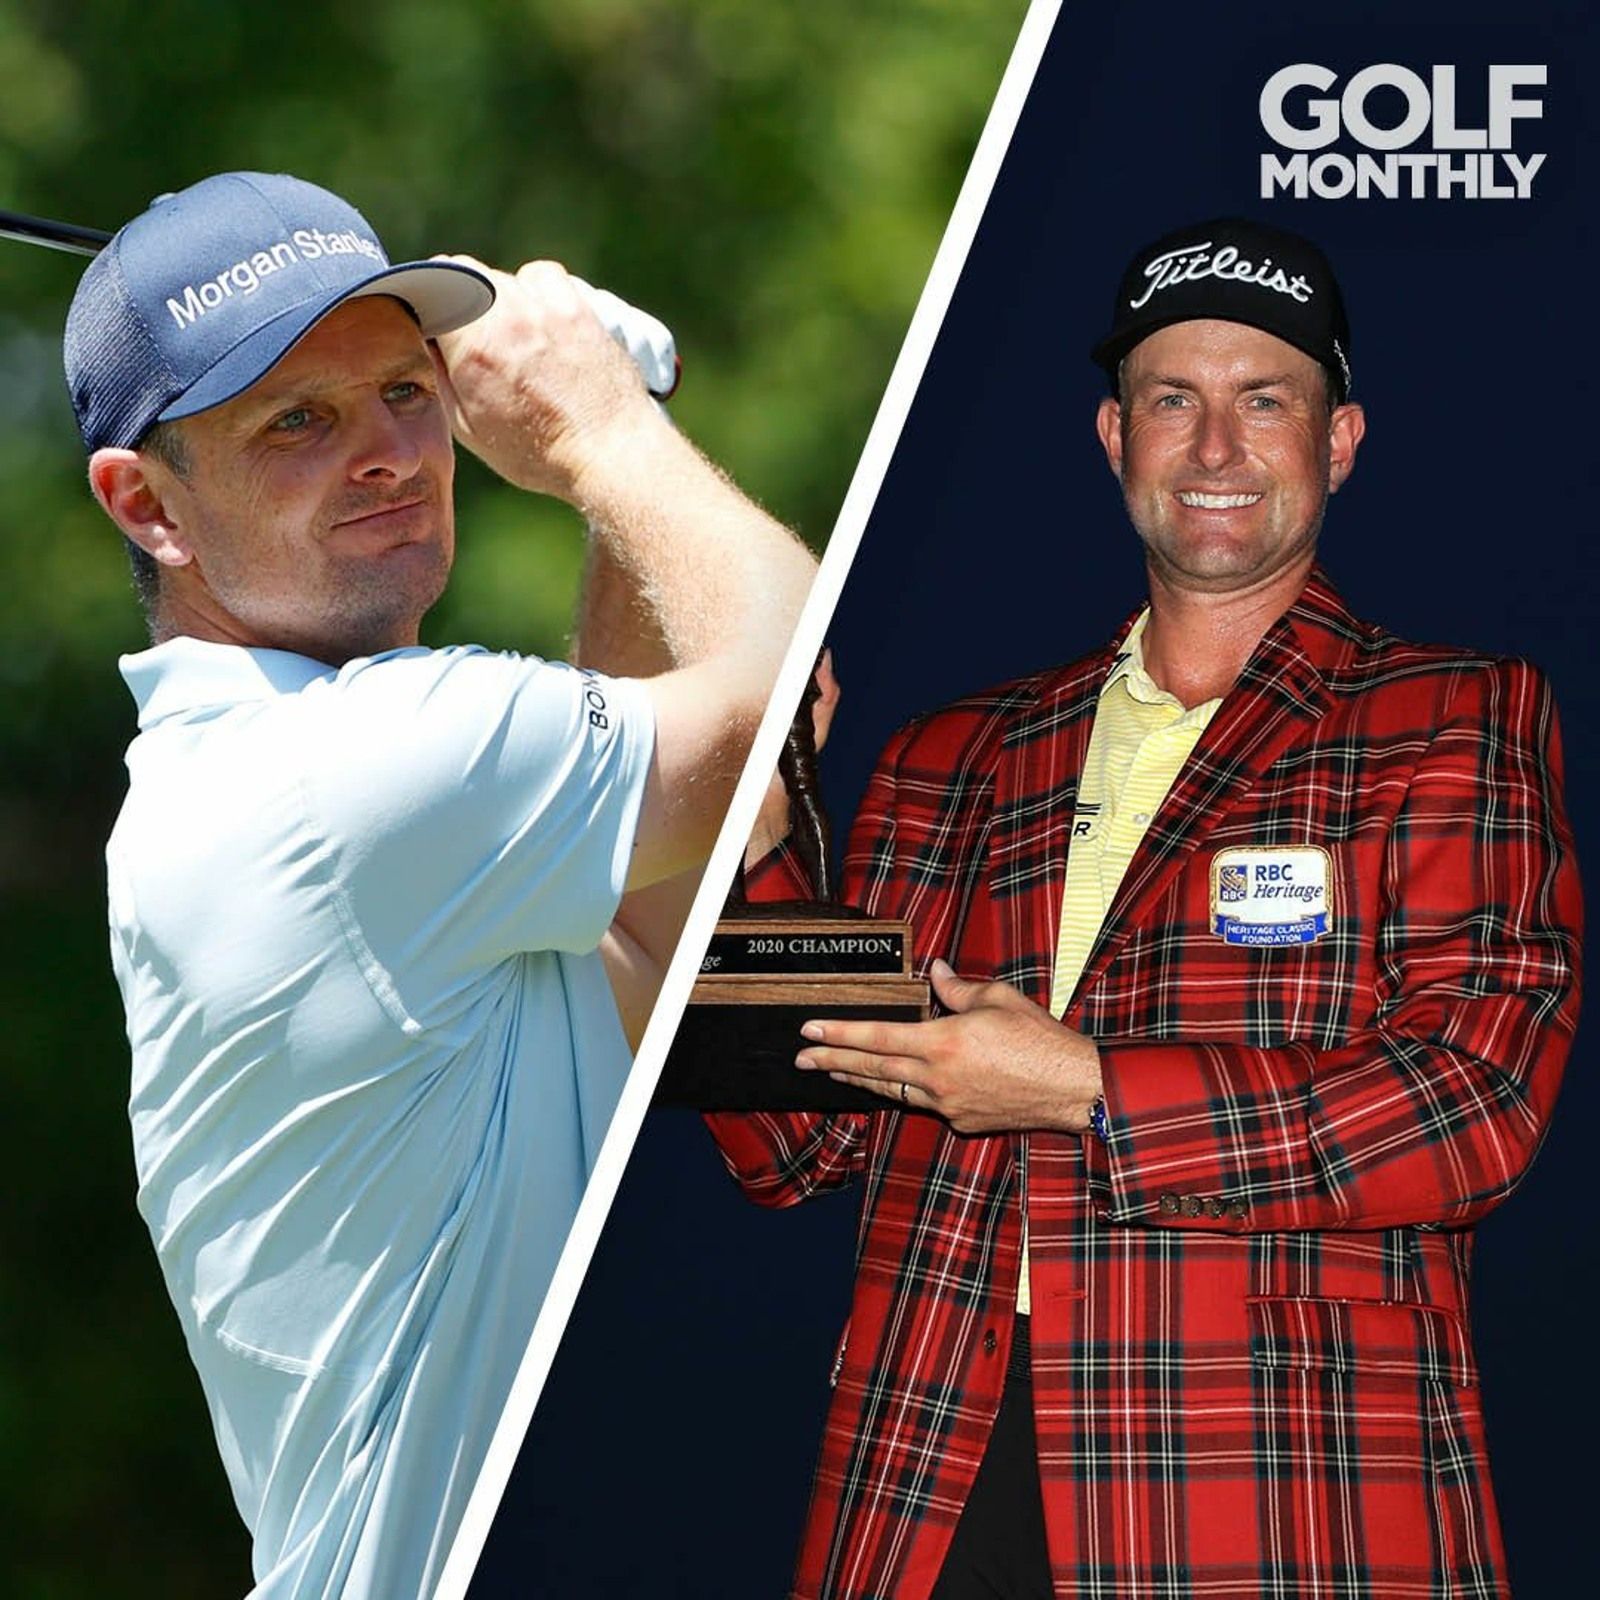 Justin Rose exclusive + Is Simpson golf's most underrated player?